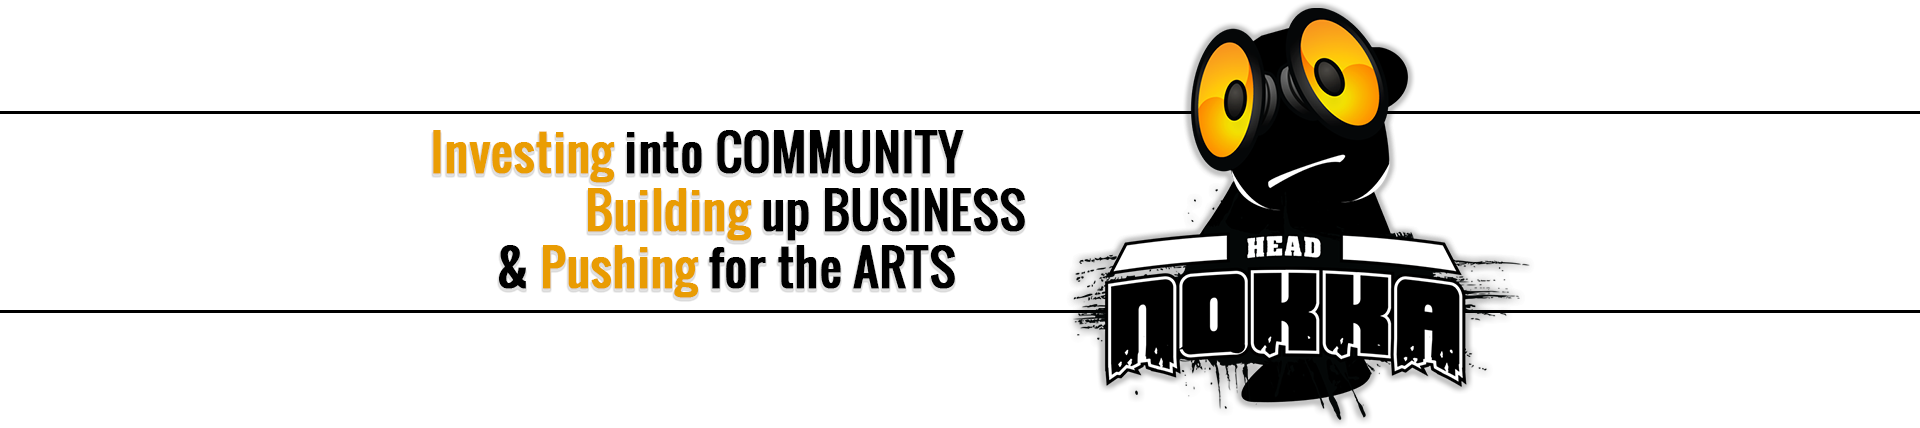 Investing in Community, Building Up Business & Pushing for the Arts.